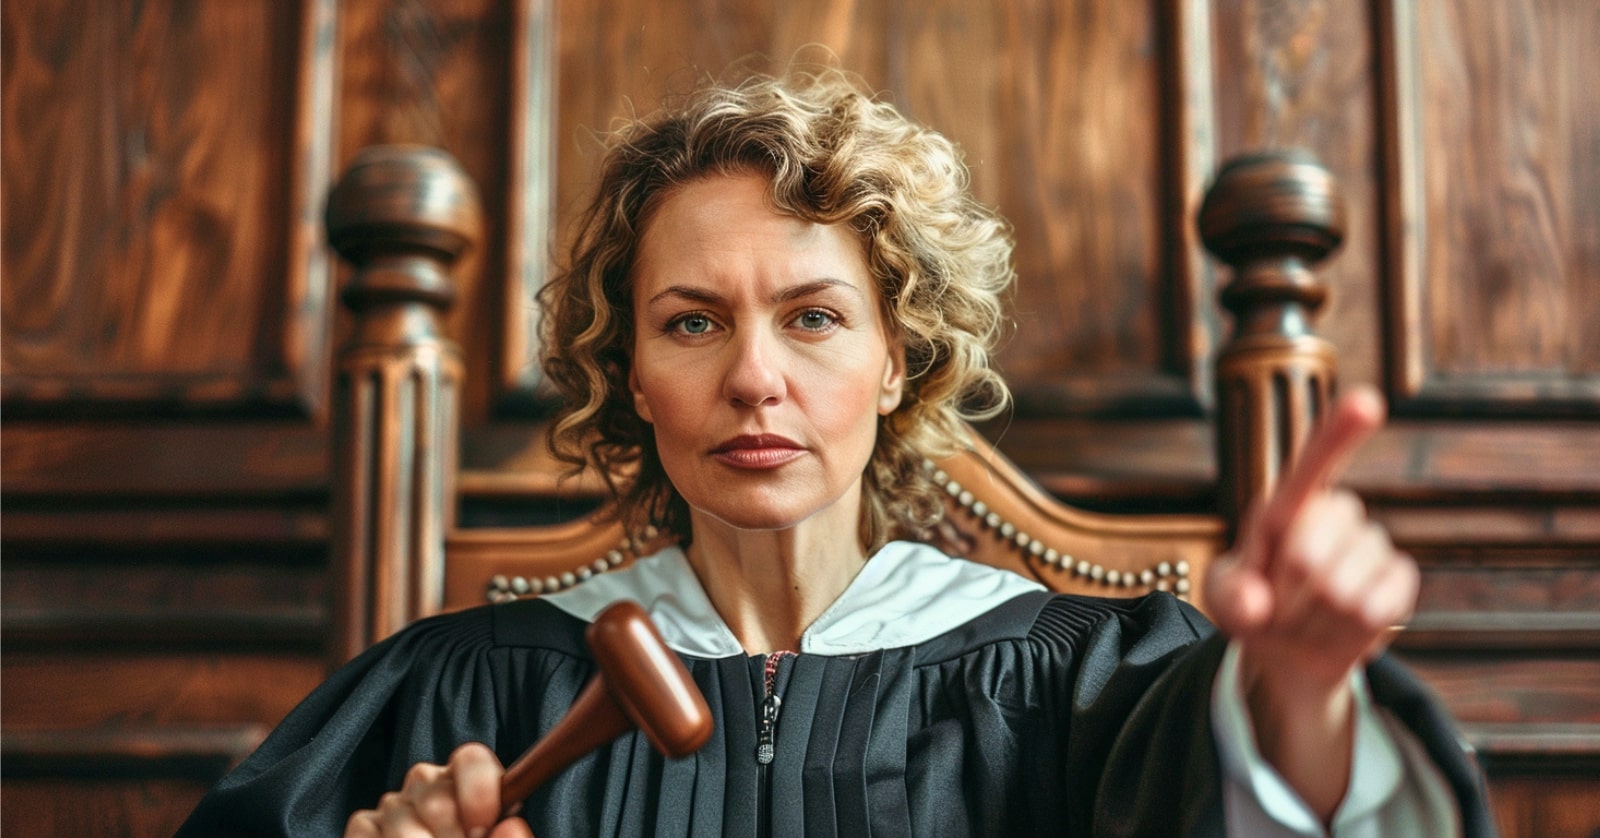 a female judge wearing black judicial robes in a courthouse holding a gavel and pointing her finger